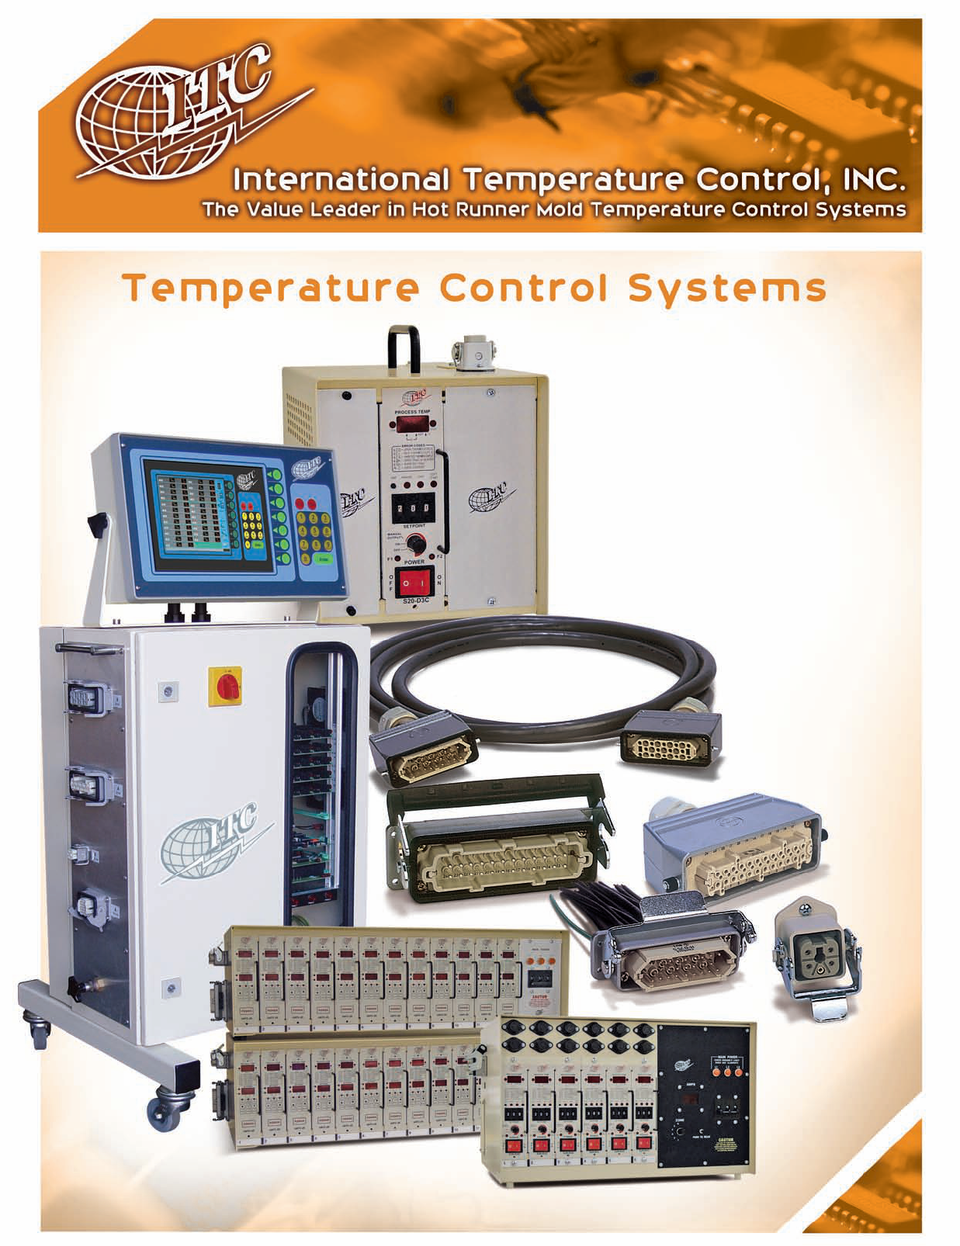 Temp control system fisa page 1 image 0001